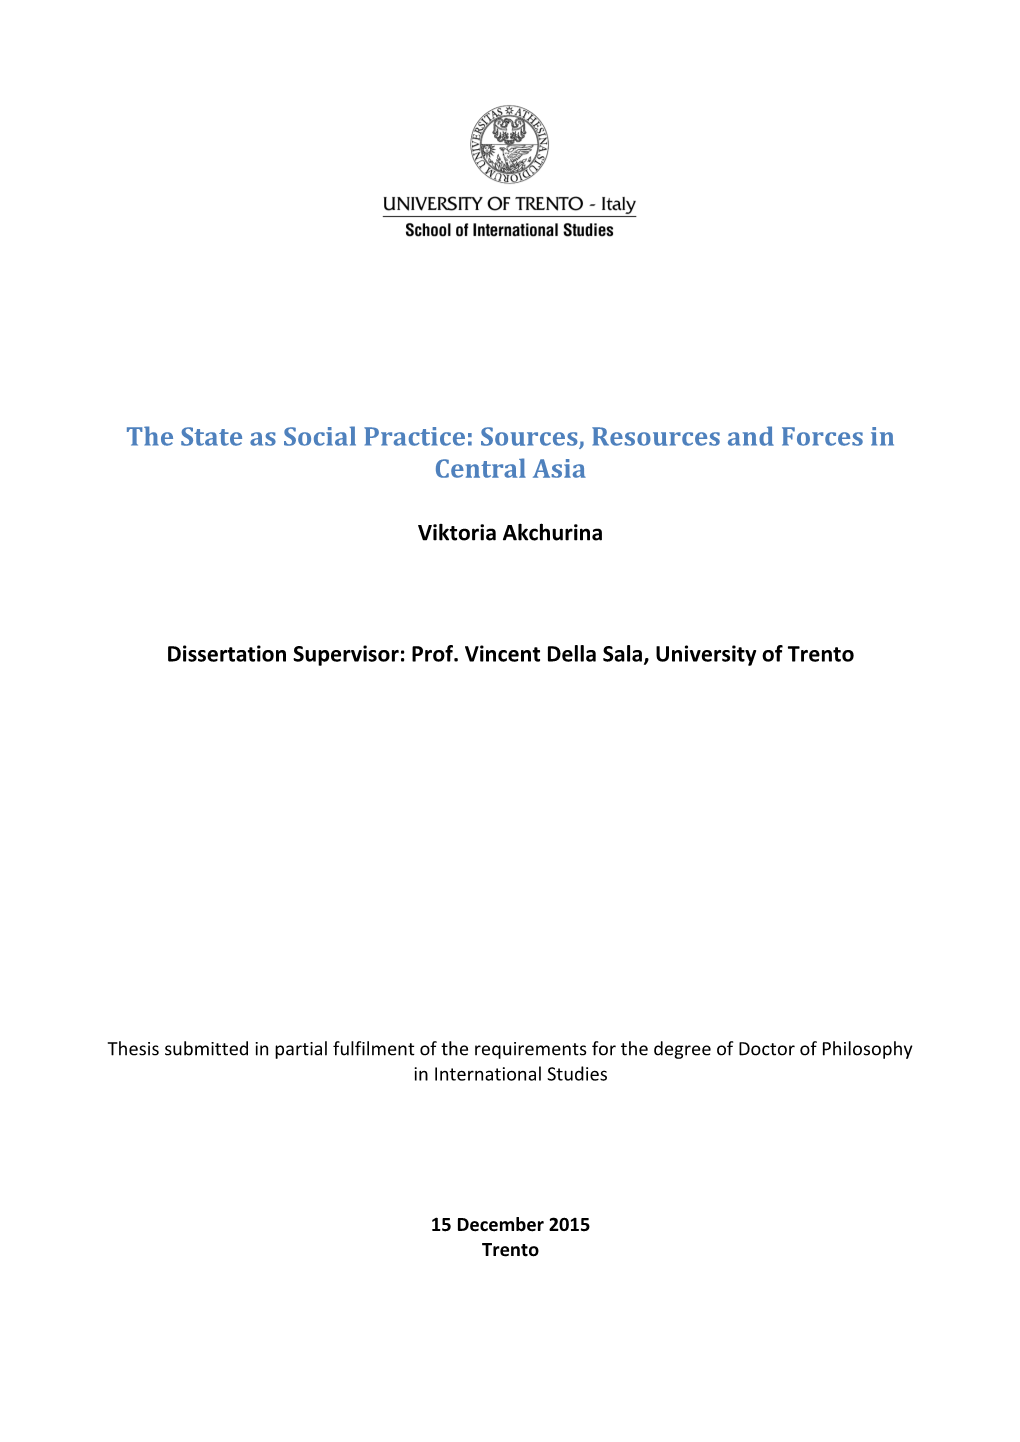 The State As Social Practice: Sources, Resources and Forces in Central Asia